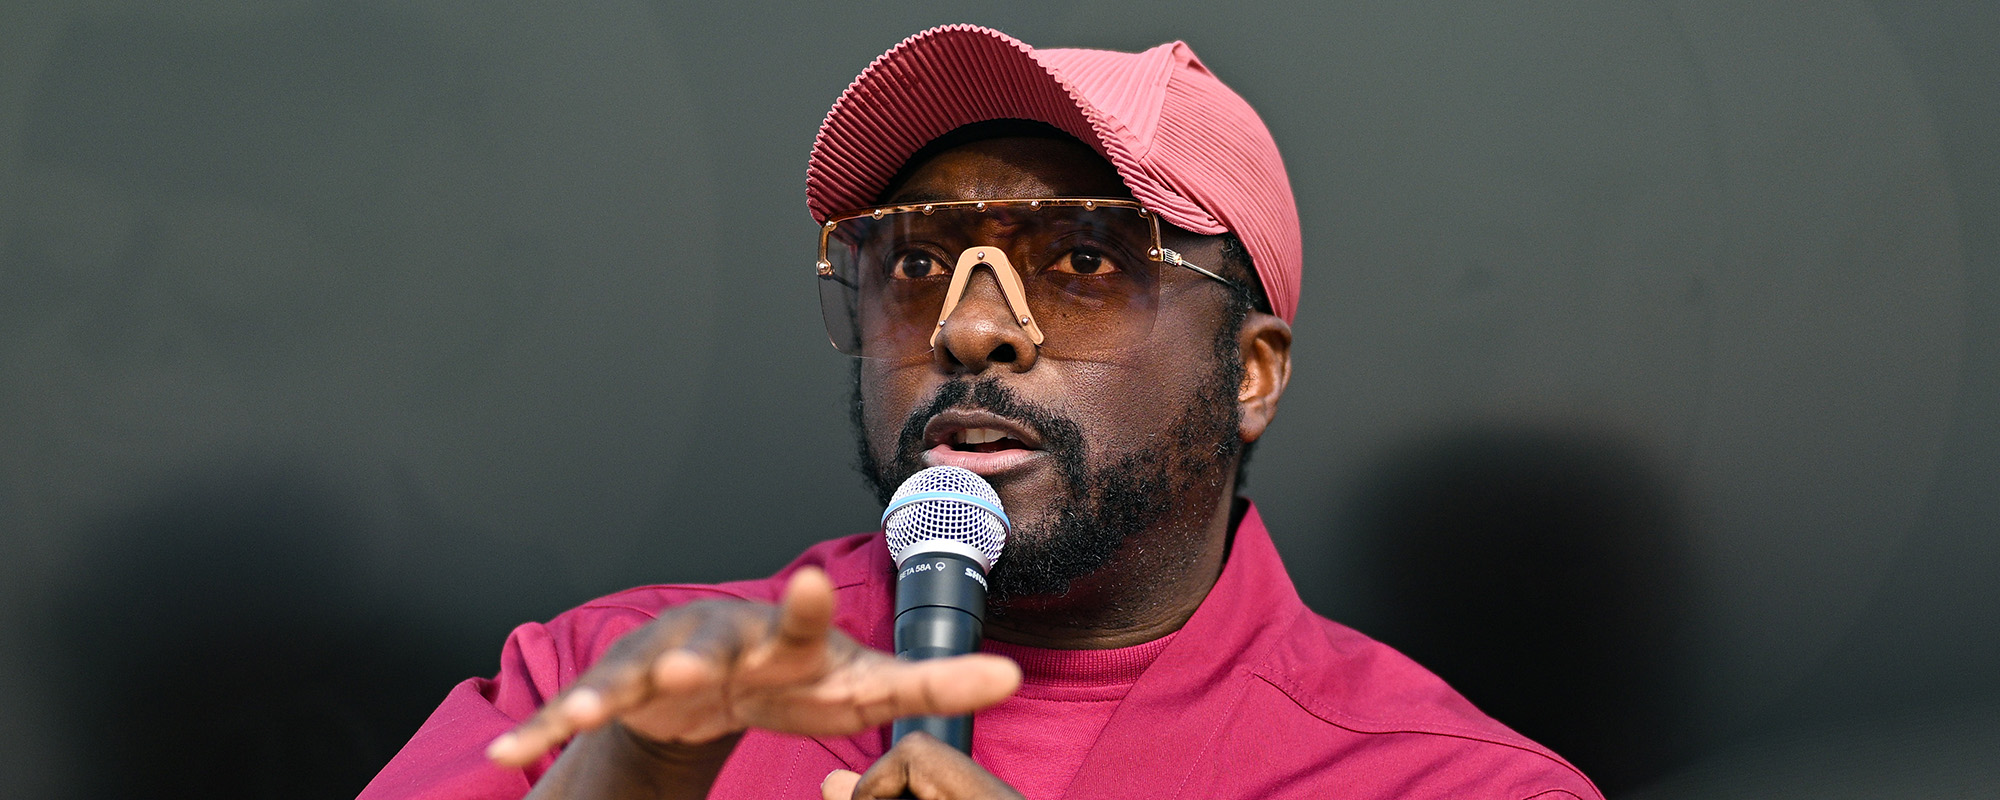 Will.i.am to Host AI-Themed Show on SiriusXM